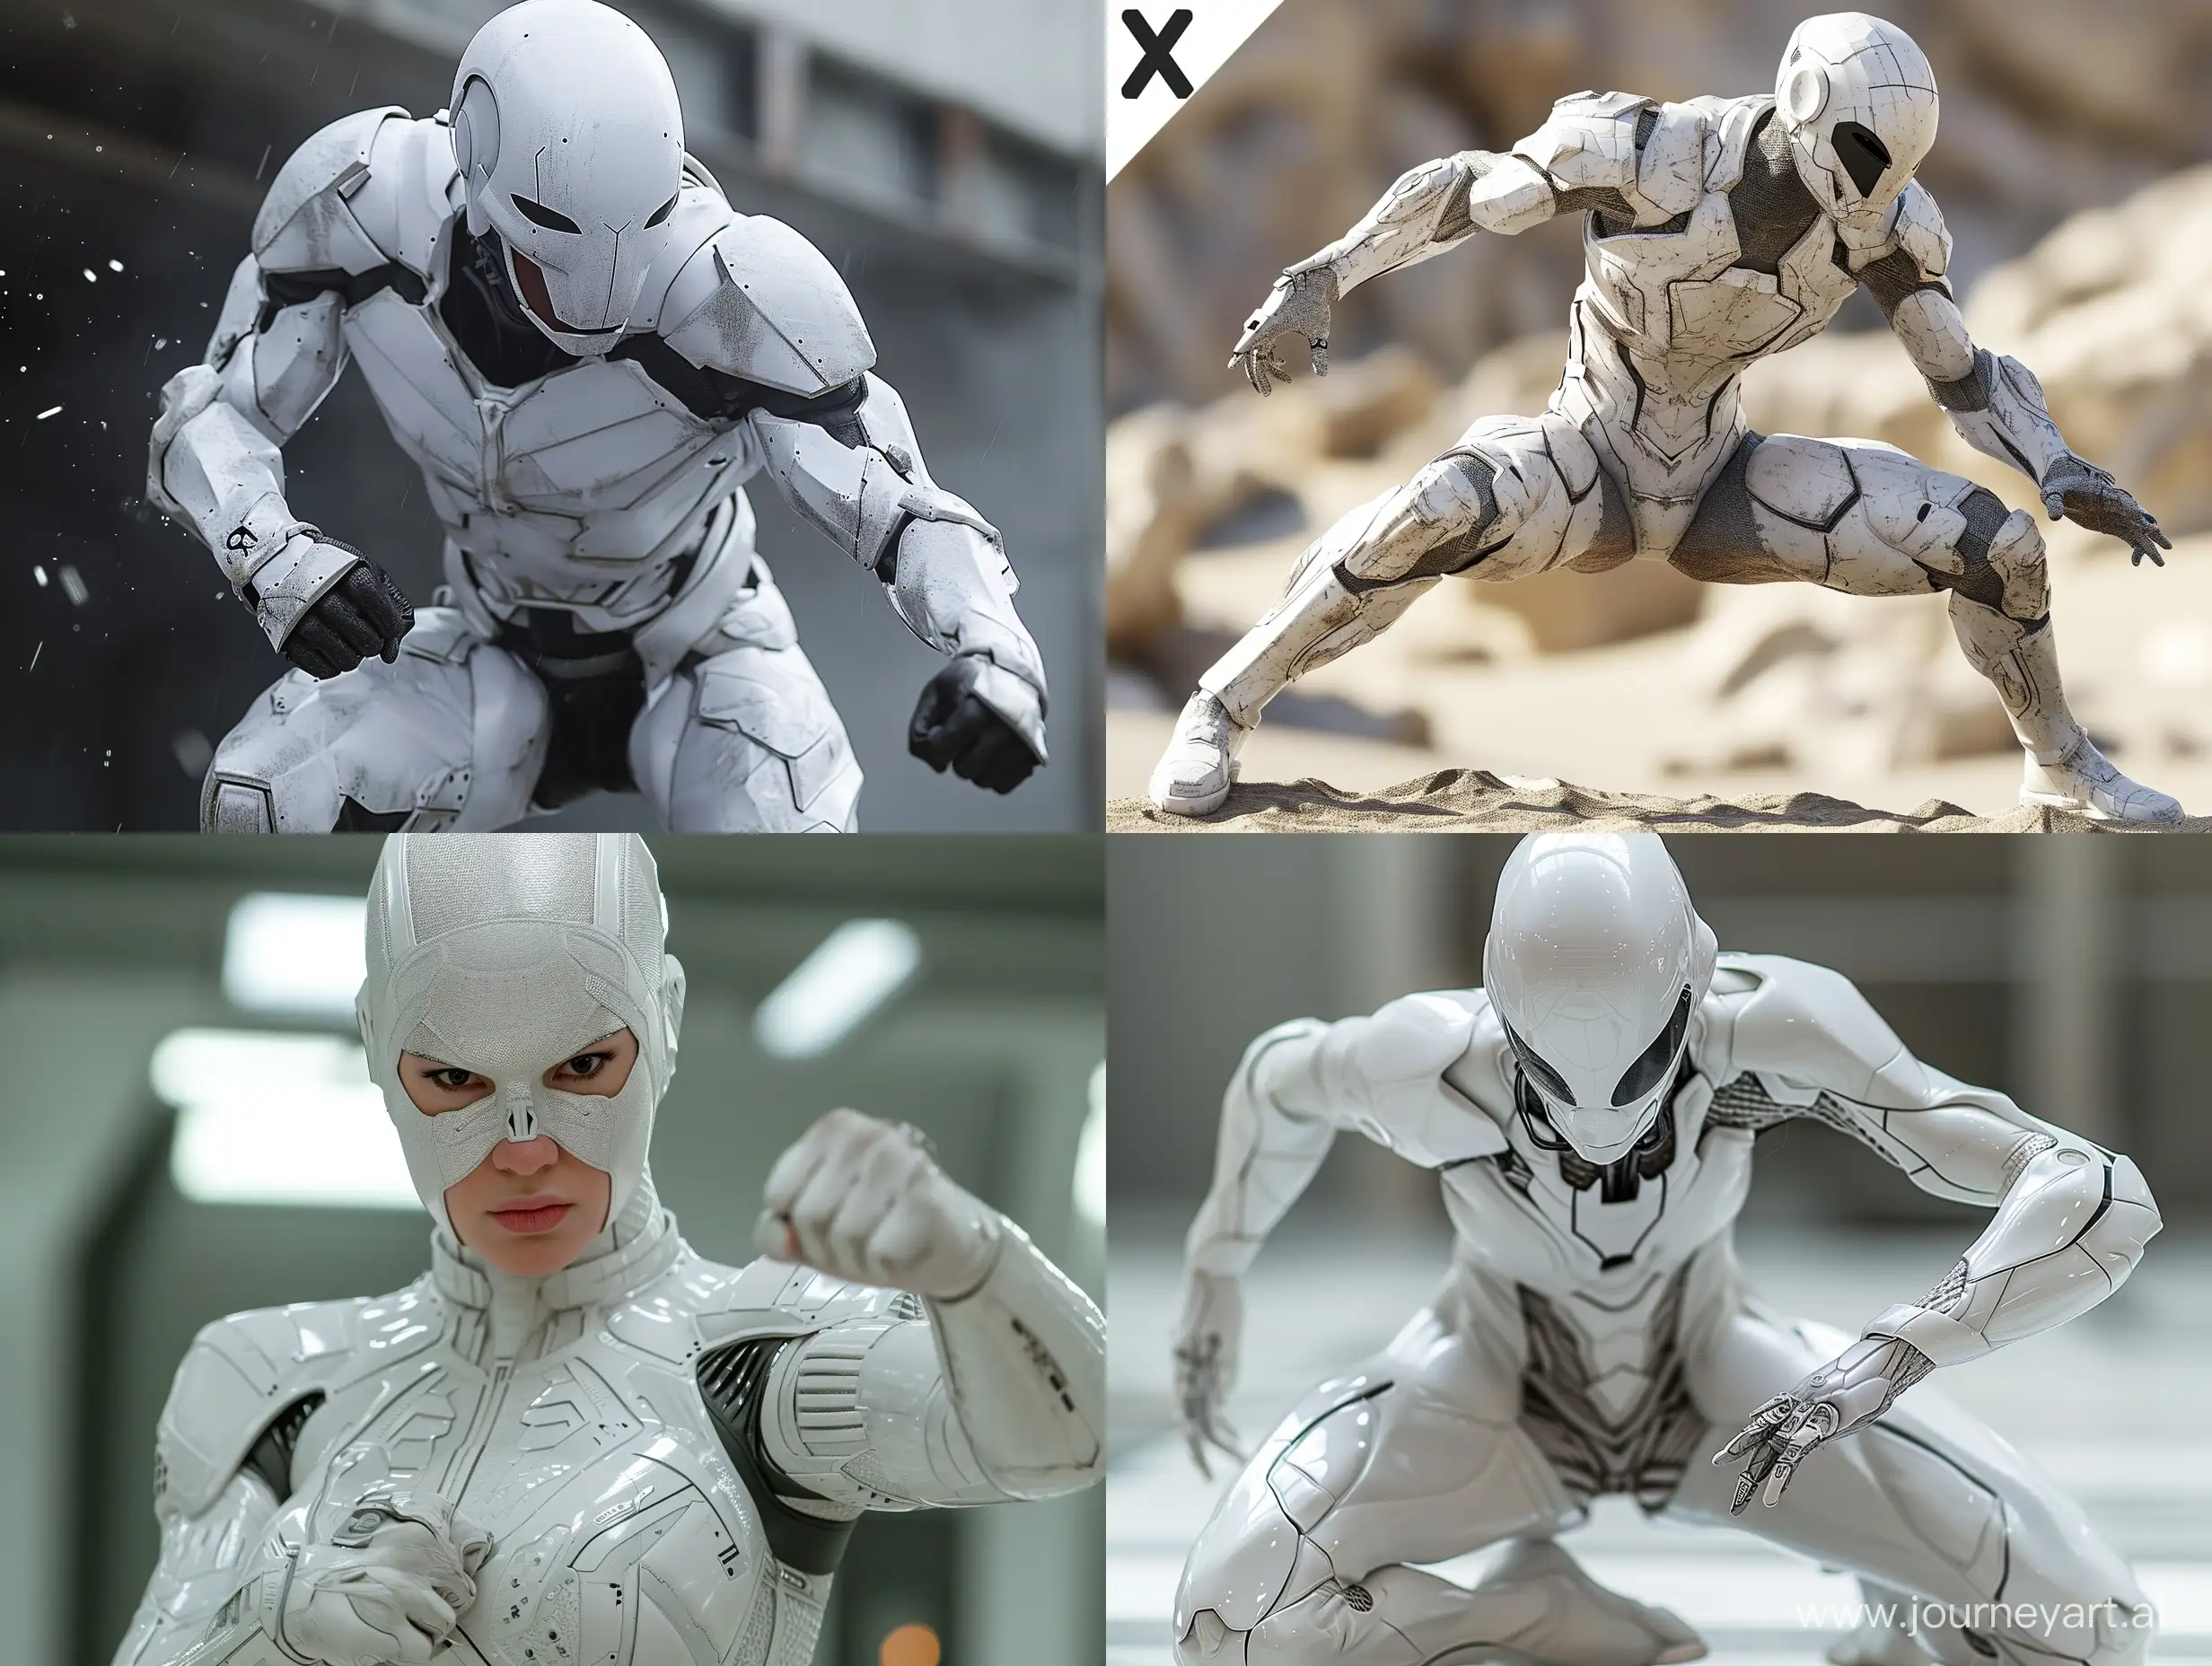 Hyper-Realistic-Action-Figure-in-Cinematic-Pose-WhiteX-v60